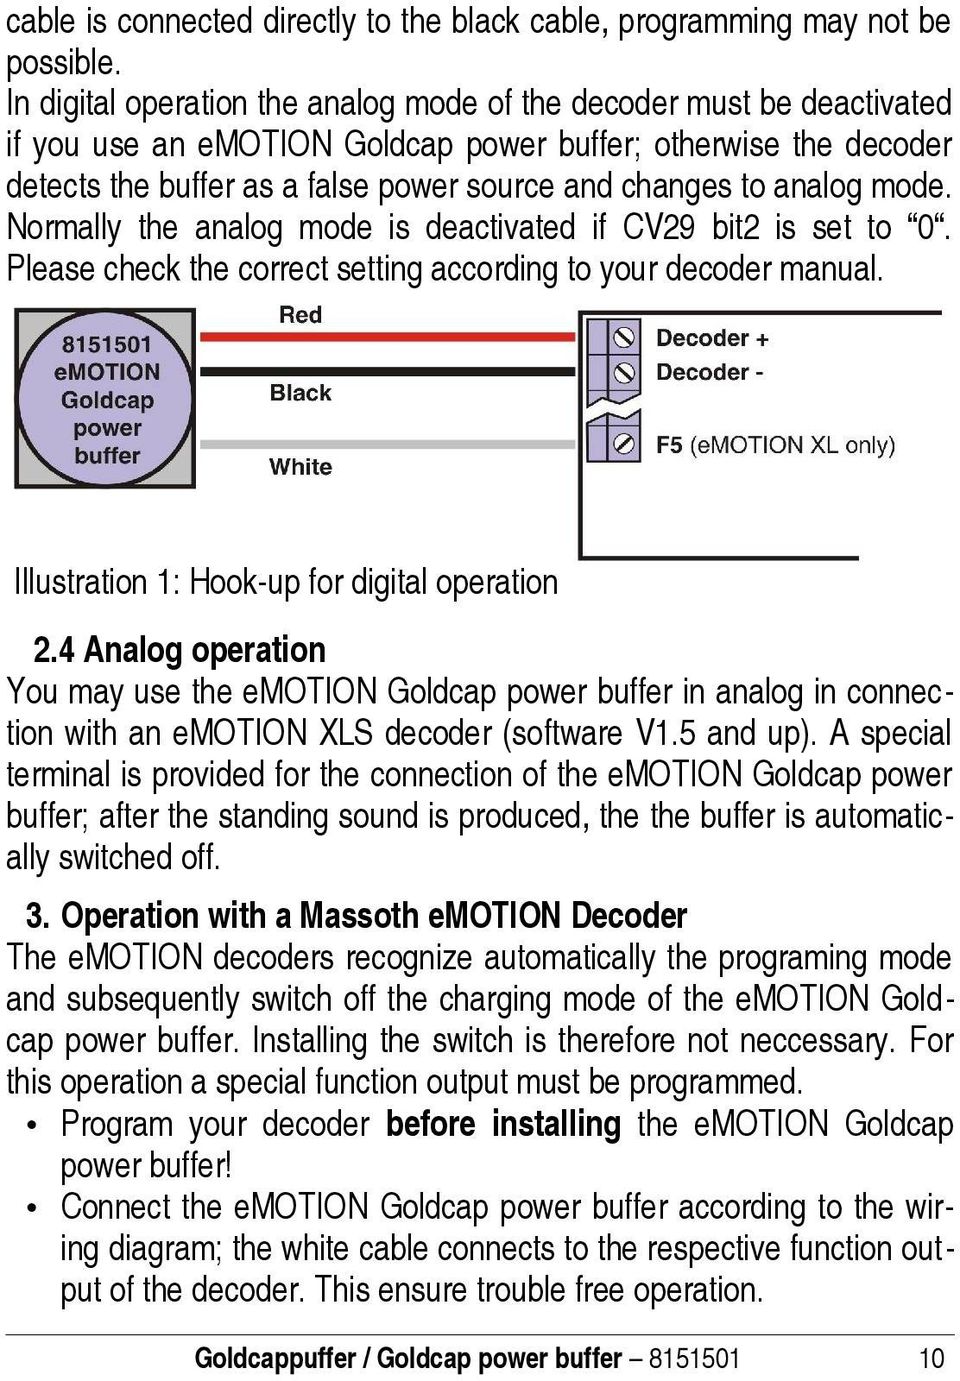 analog mode. Normally the analog mode is deactivated if CV29 bit2 is set to 0. Please check the correct setting according to your decoder manual. Illustration 1: Hook-up for digital operation 2.